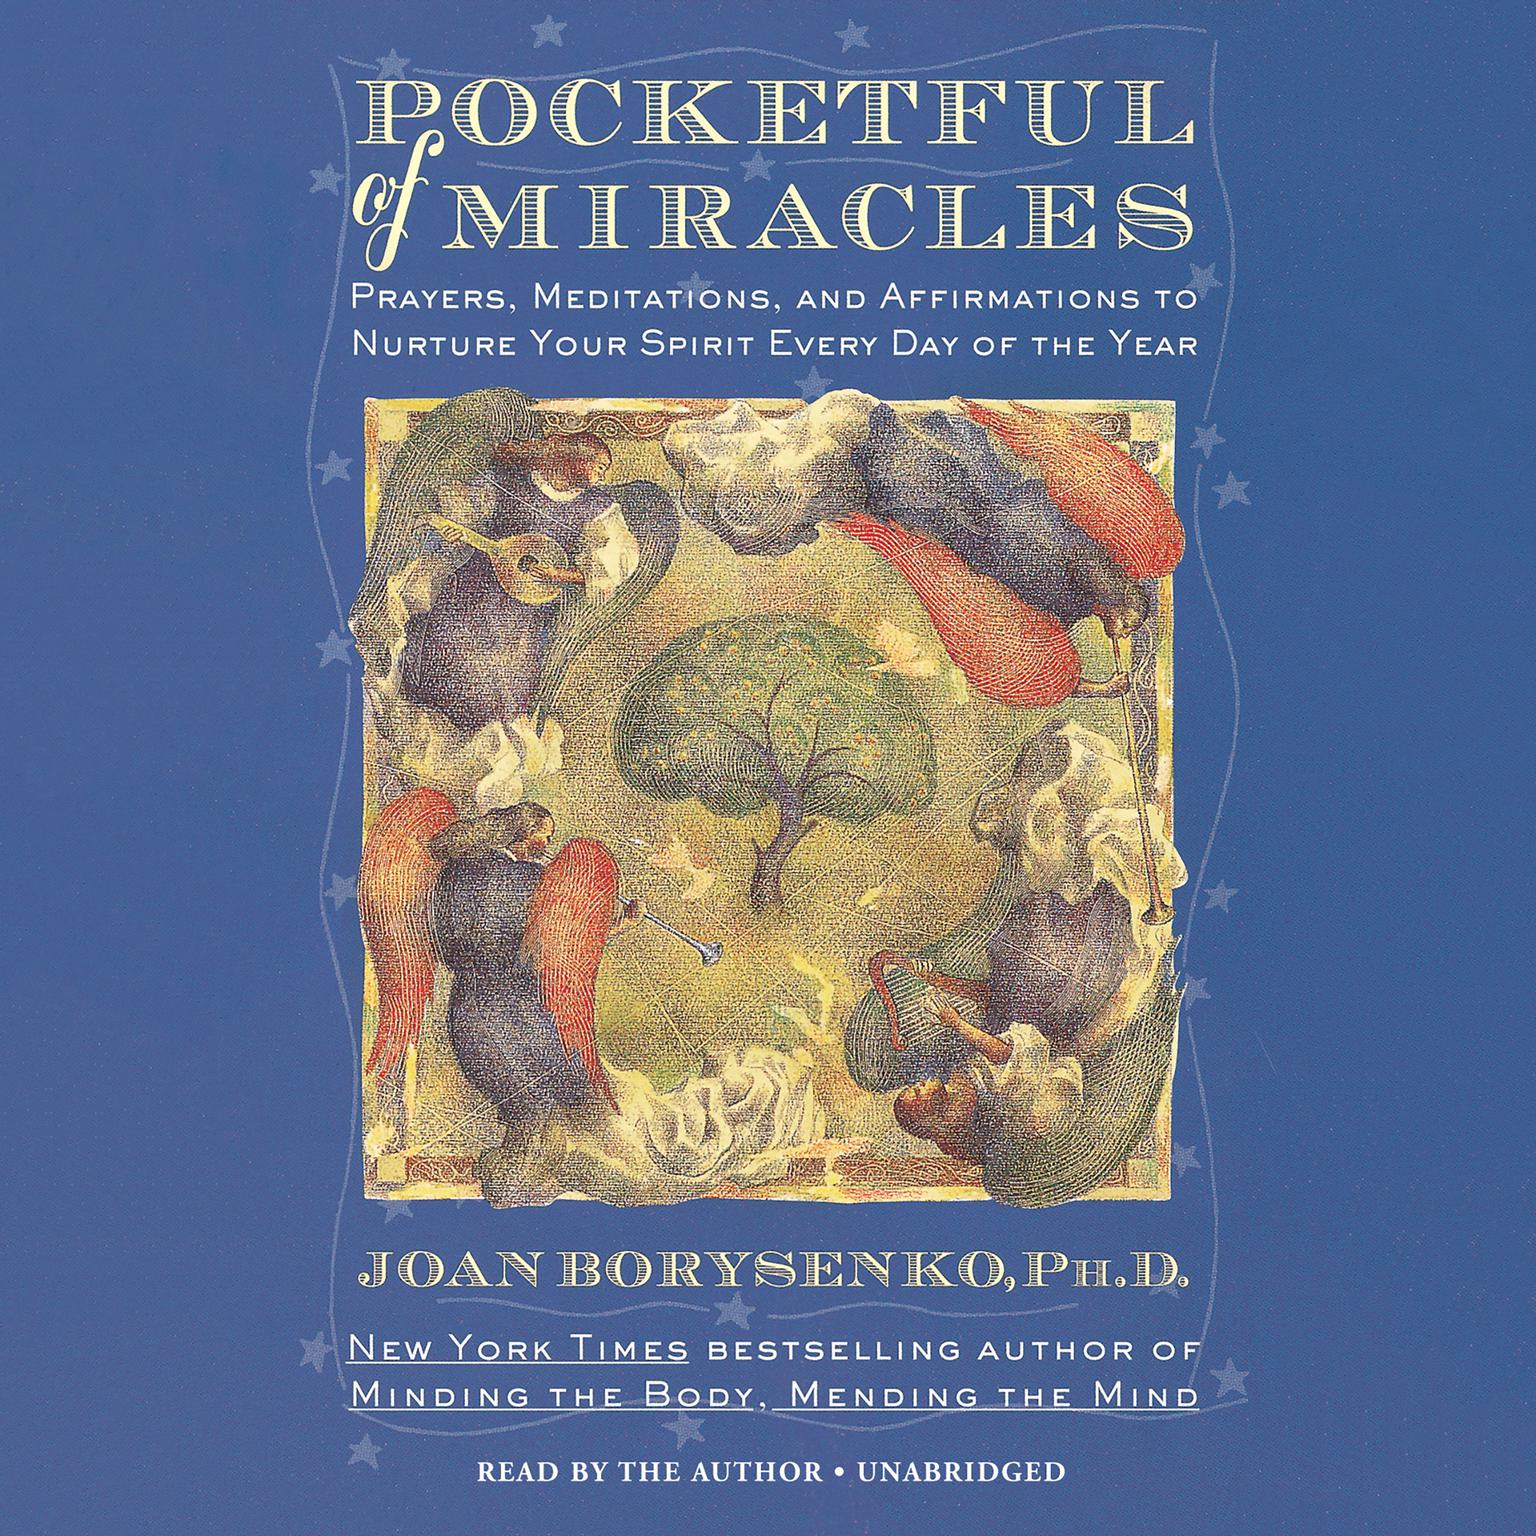 Pocketful of Miracles: Prayer, Meditations, and Affirmations to Nurture Your Spirit Every Day of the Year Audiobook, by Joan Borysenko